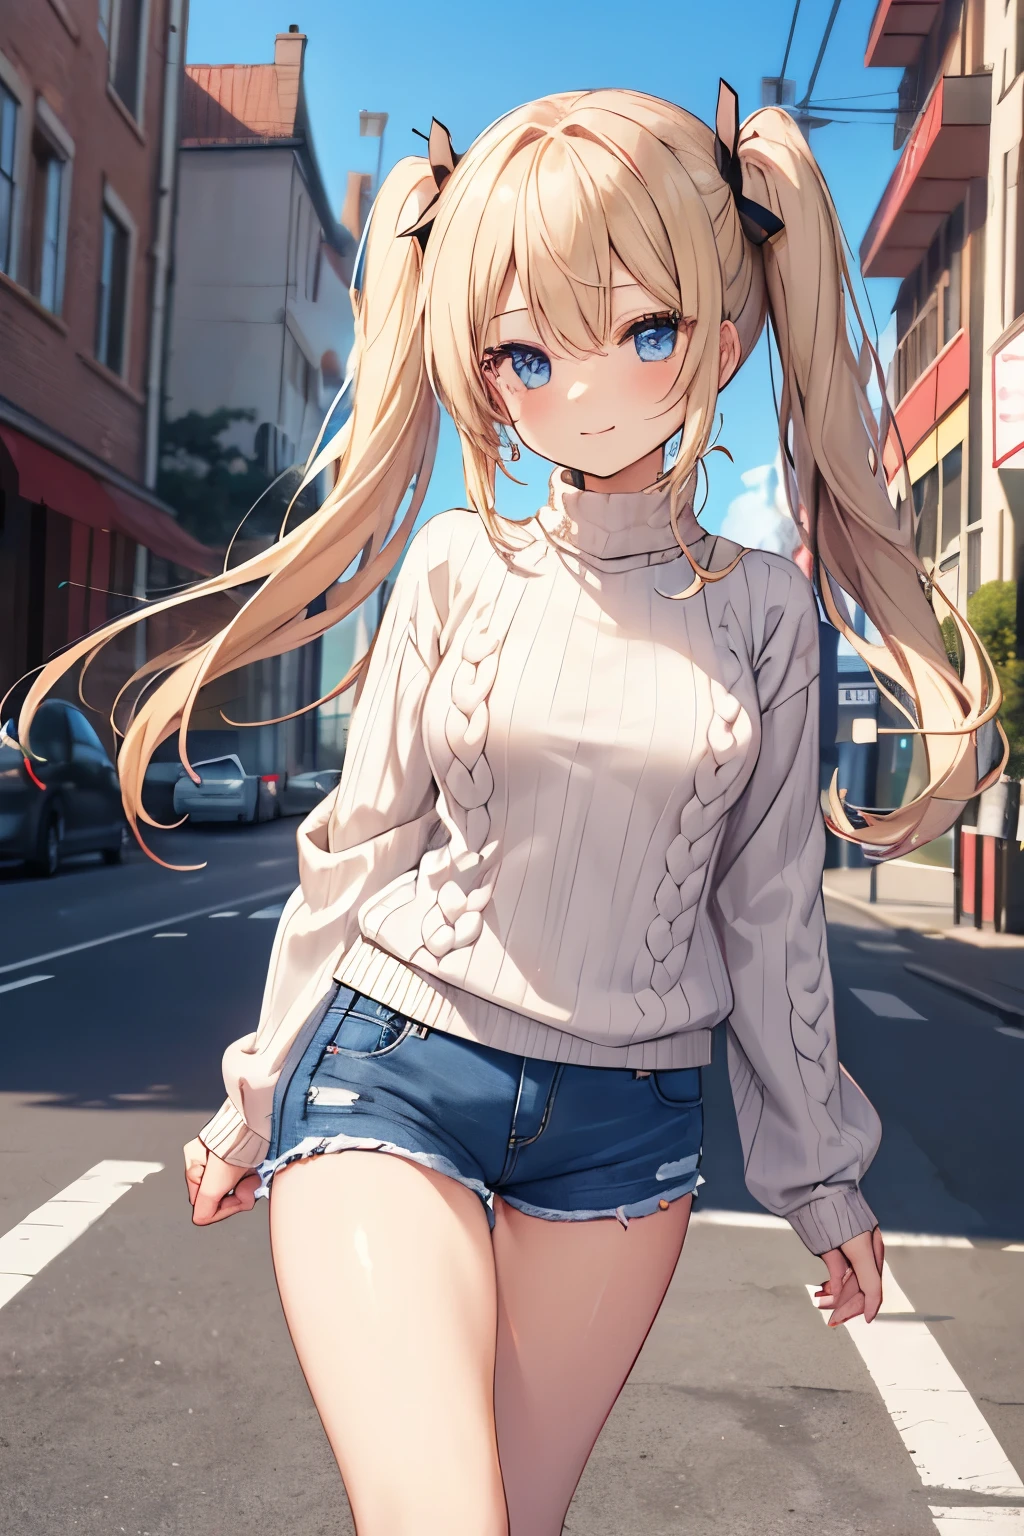 Blonde、Blue Eyes、girl、Small breasts、Twin tails、girl、Small breasts、Lolita、Bright smile、Looks about 15 years old、Petan Musume、short、目のhighlight、Sexy thighs、Walking Outside、blue sky、(Long knit sweater with beige high neck:1.4), ,(Blue jeans fabric shorts),Your eyes are so beautiful、highlight